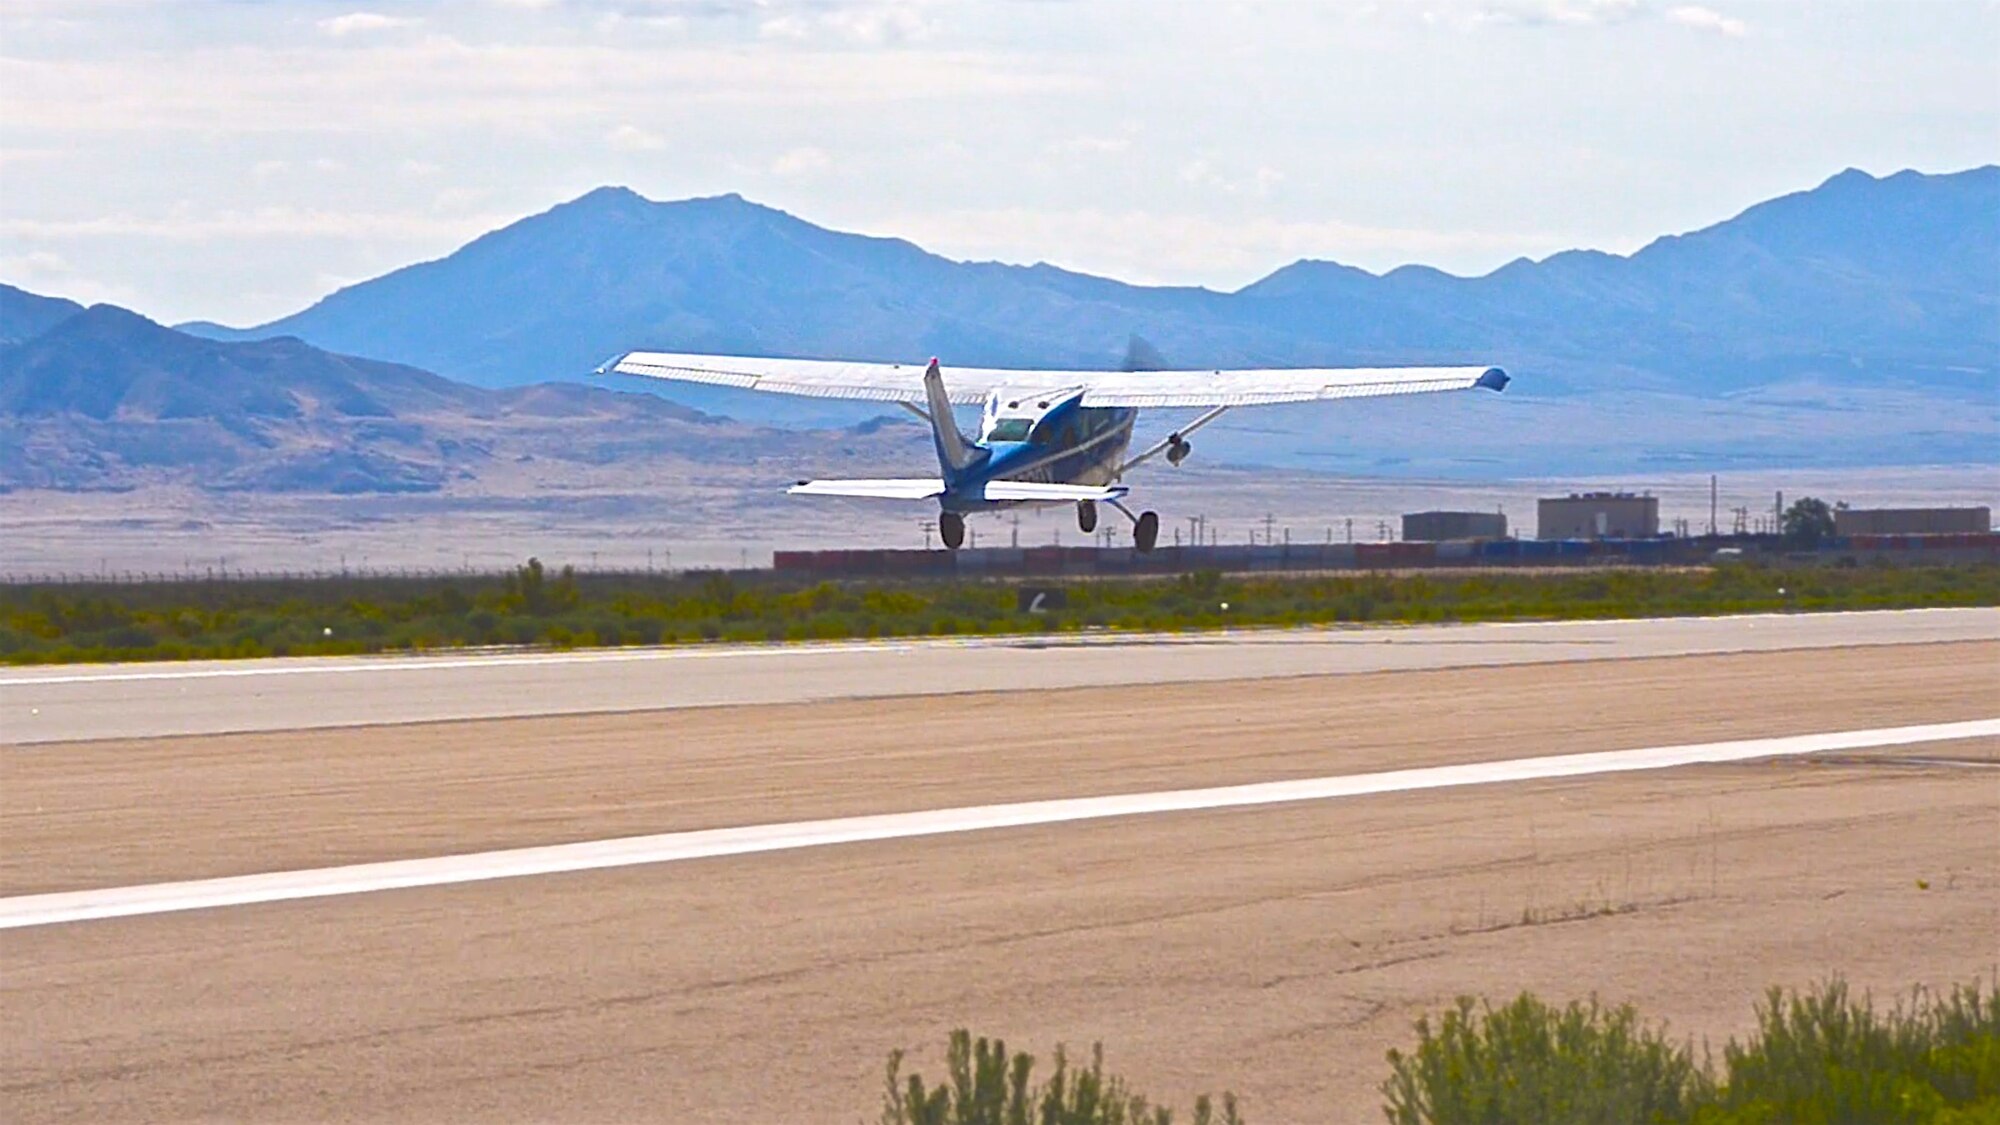 A ROBOpilot controlled 1968 Cessna 206 taking off during it’s first flight at Dugway Proving Ground, Utah. (Courtesy photo)